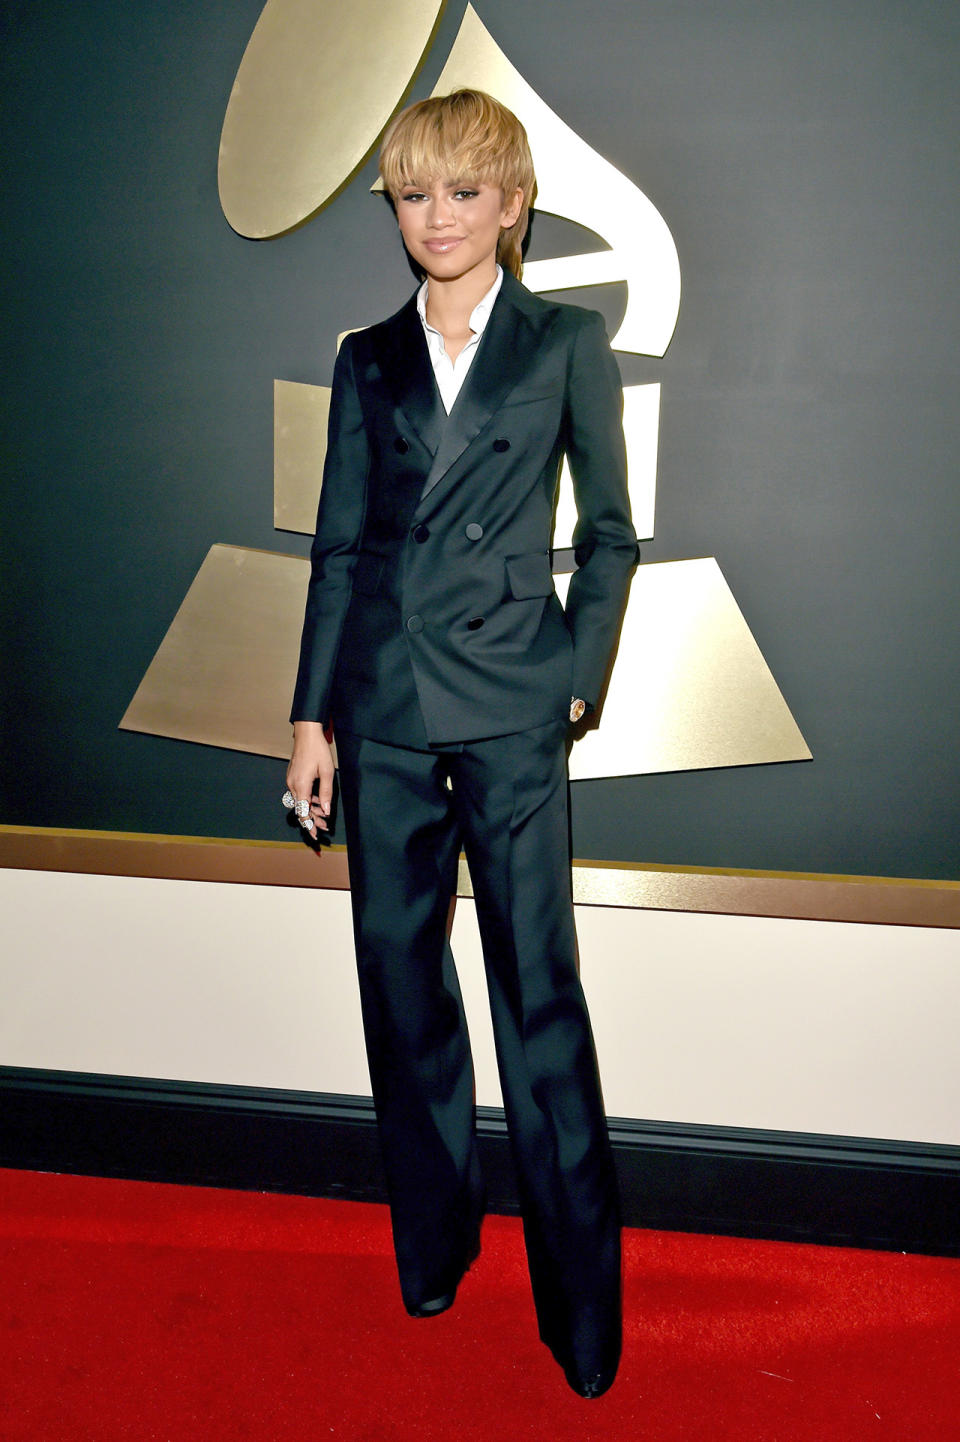 In A Dsquared2 Suit, Giuseppe Zanotti Heels And A Rolex Watch